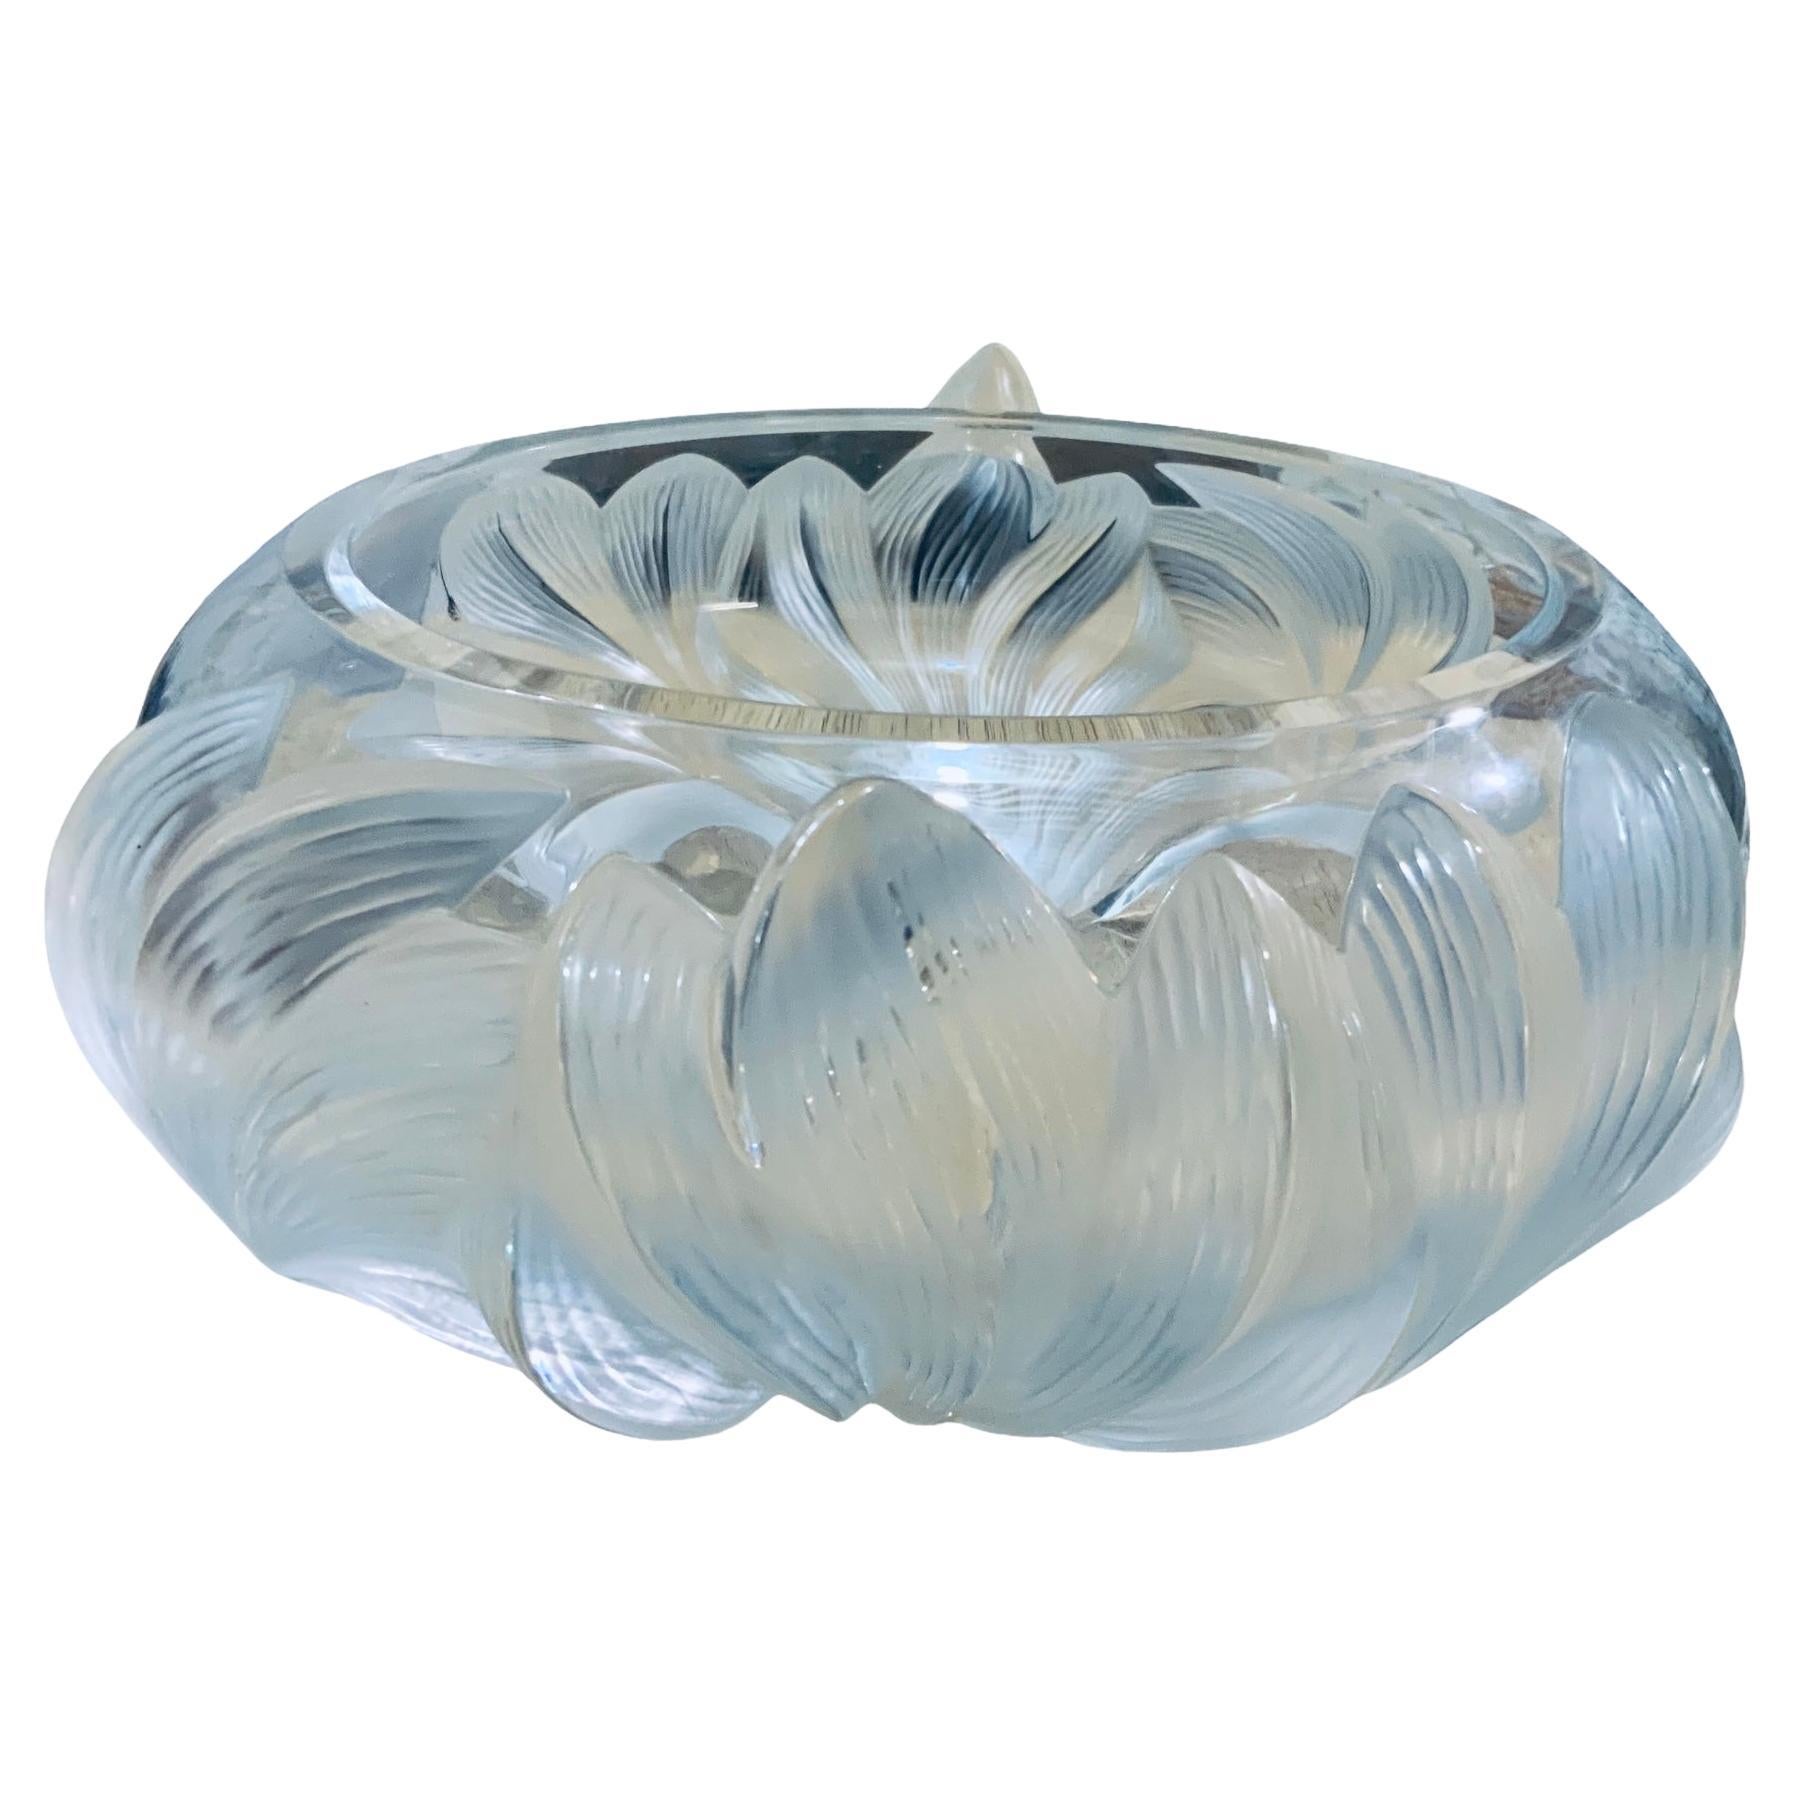 This is a Lalique frosted crystal “ Pivoine Peonies “ large round bowl centerpiece. It depicts a relief of frosted wide and long peonies flowers in two sides of the round bowl. Below the base, It is acid etched Lalique encircled R, France. Peonies